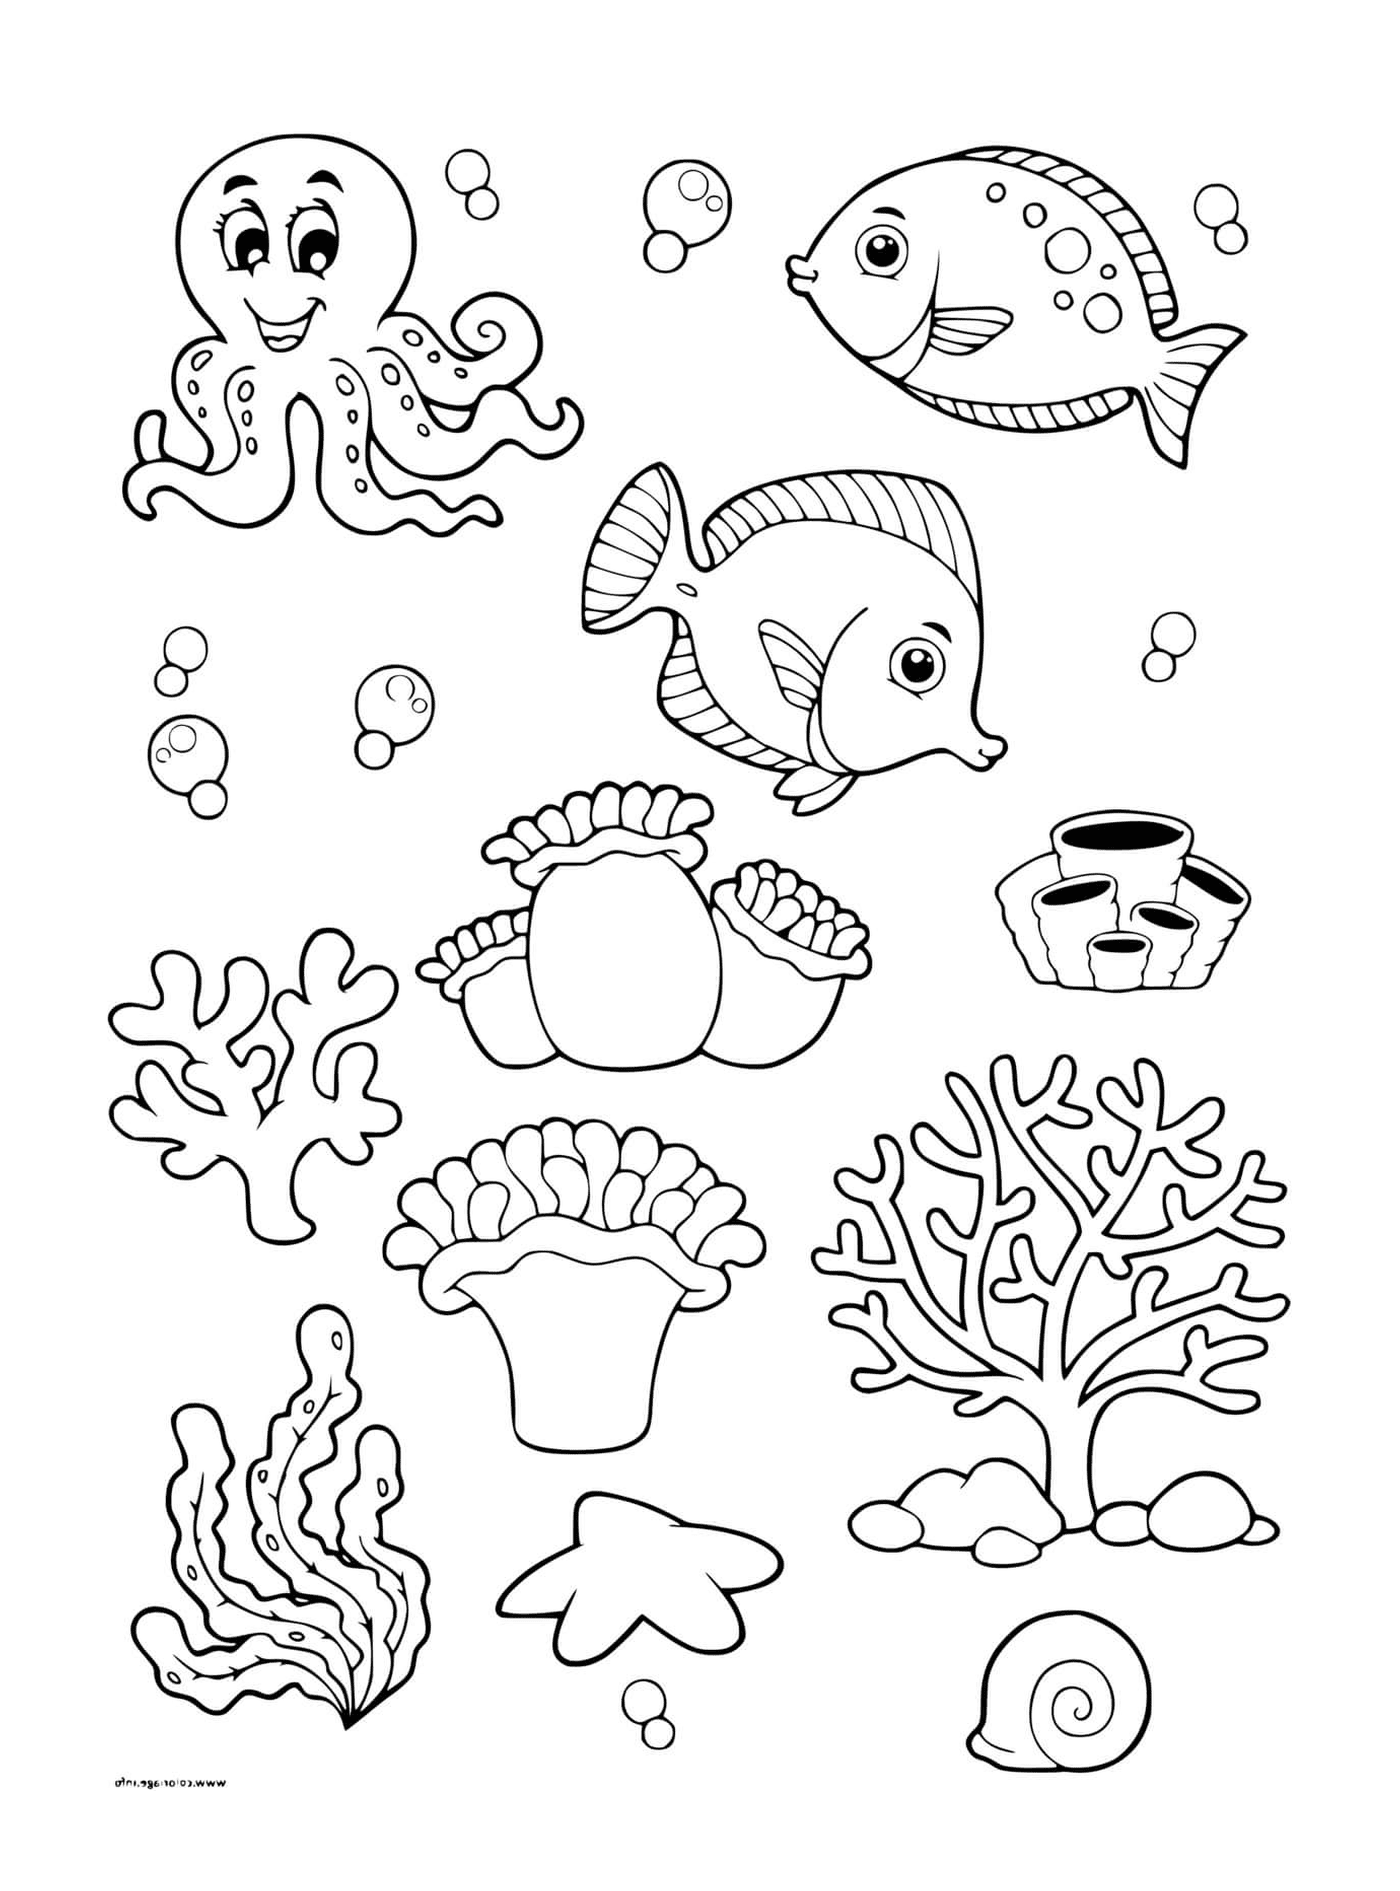  Marine life at the seabed 